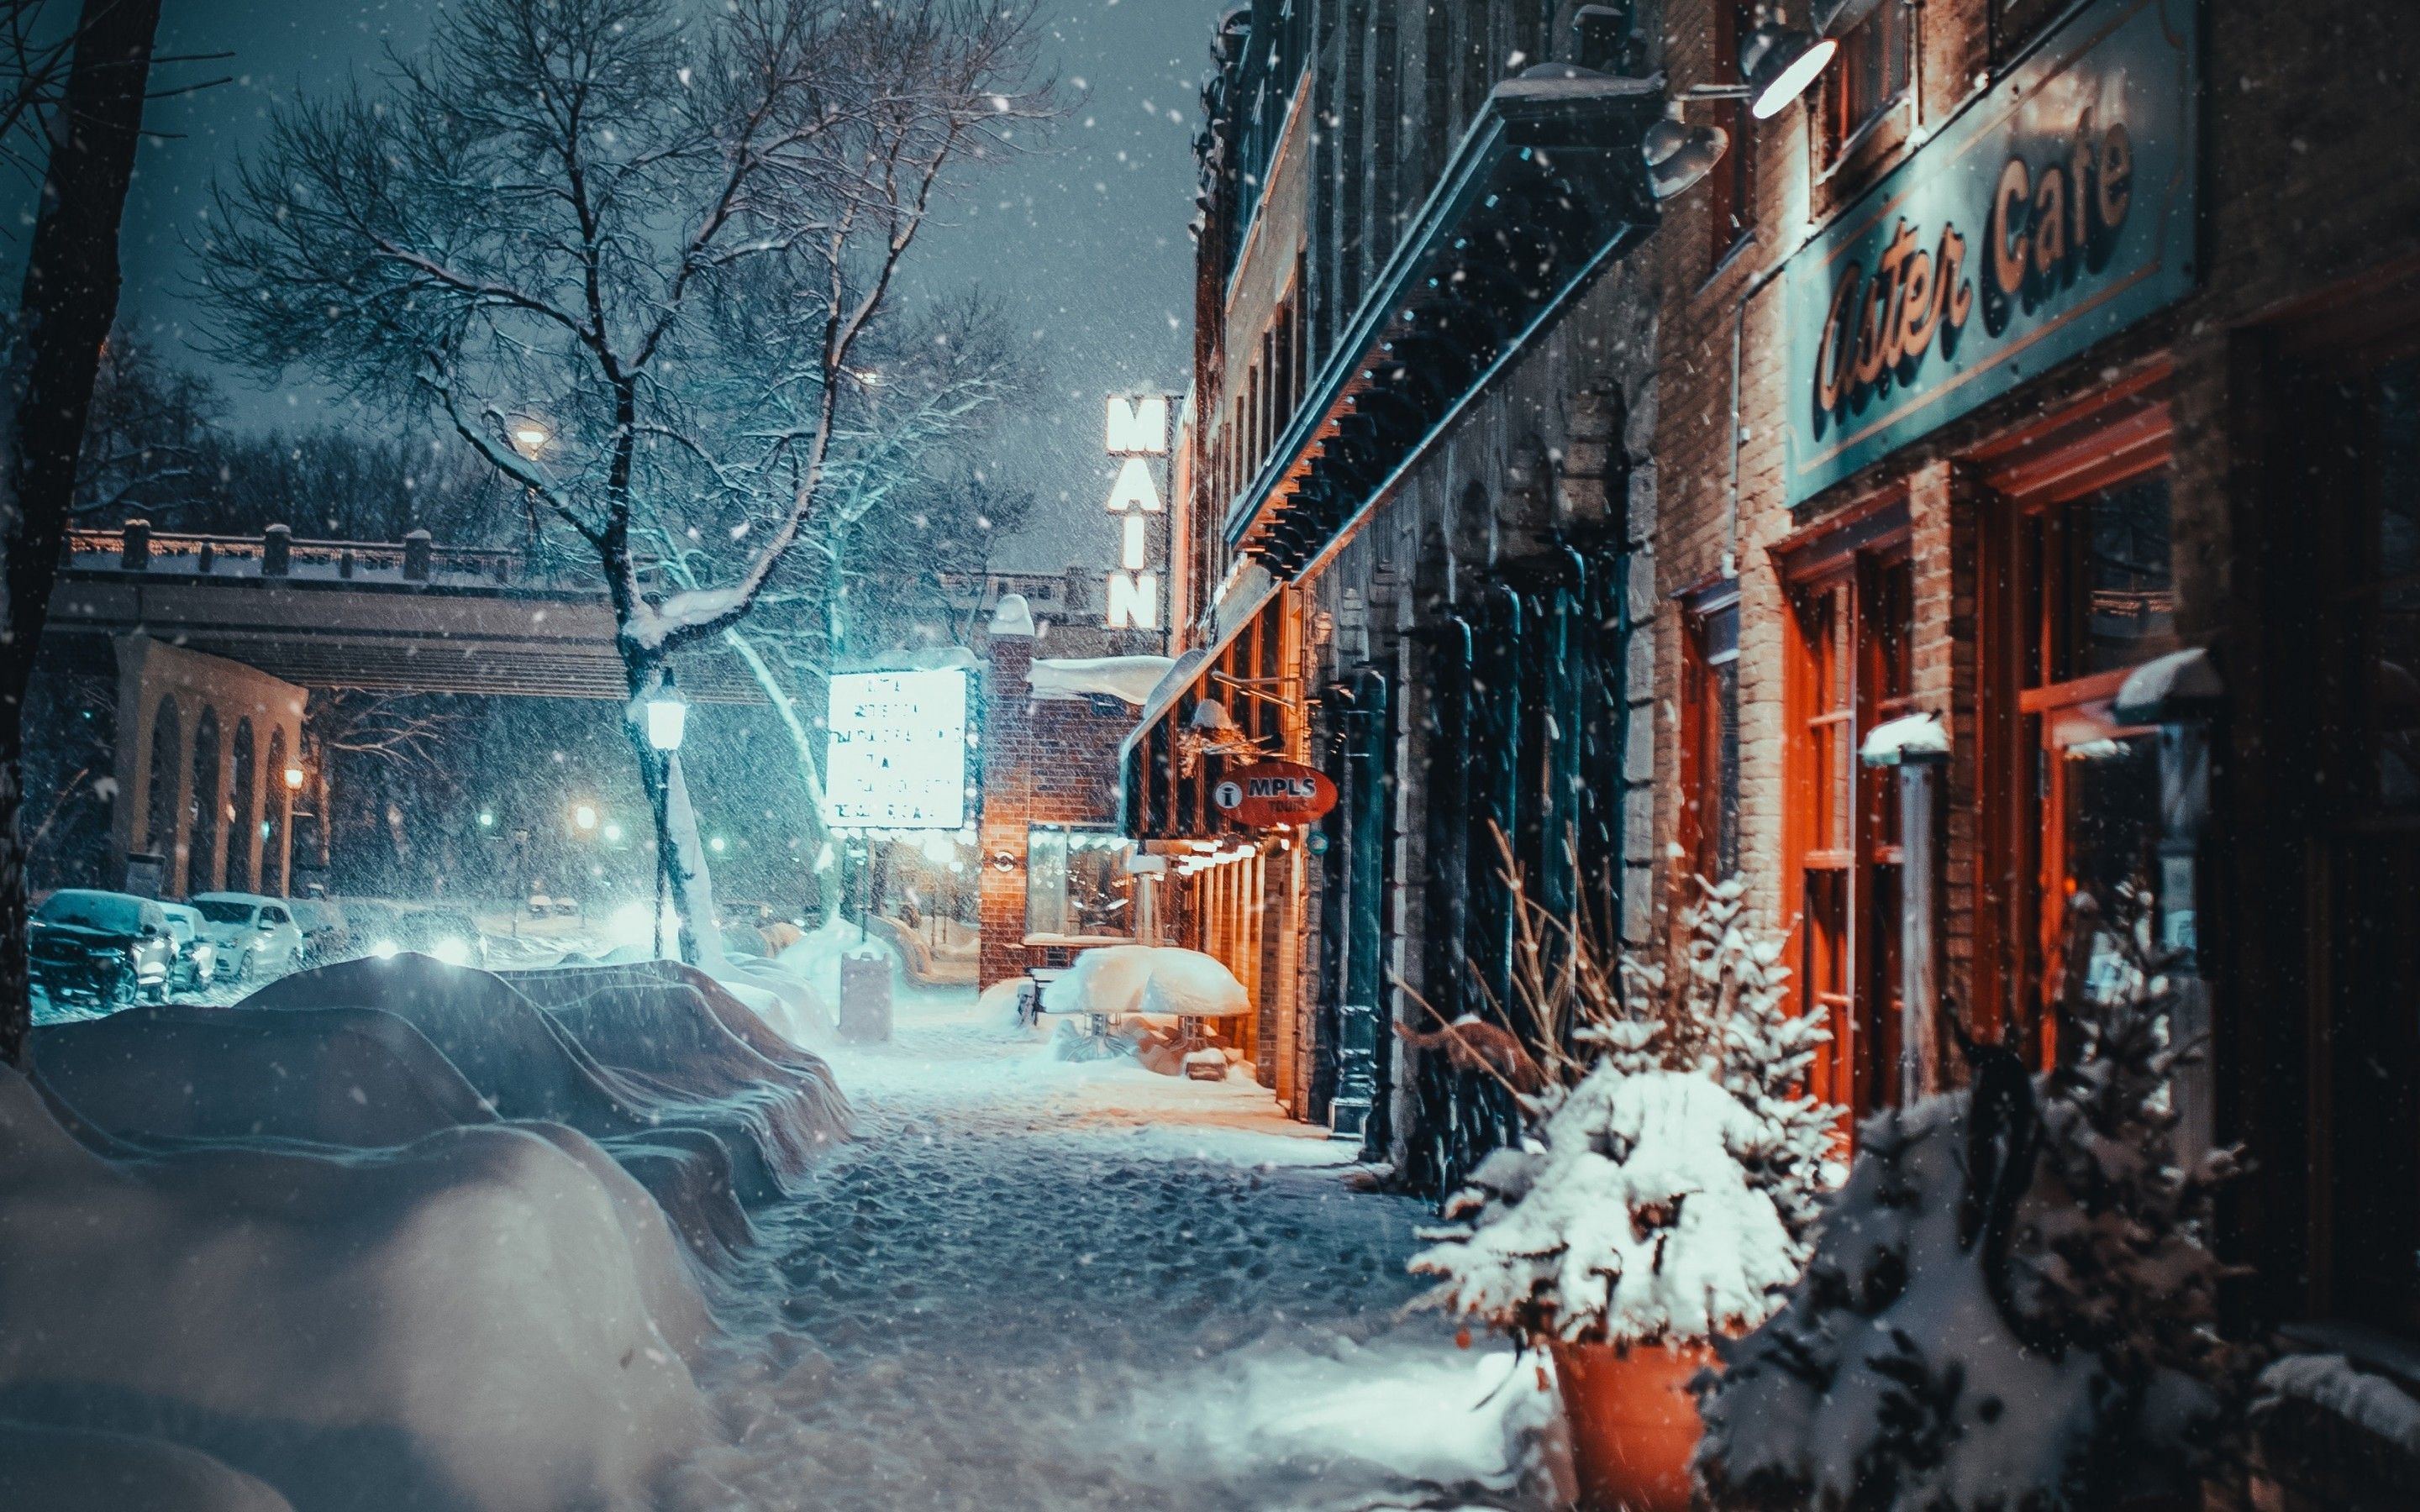 Download 2880x1800 Winter, Town, Urban, Storm, Blizzard, Snow, Buildings Wallpaper for MacBook Pro 15 inch